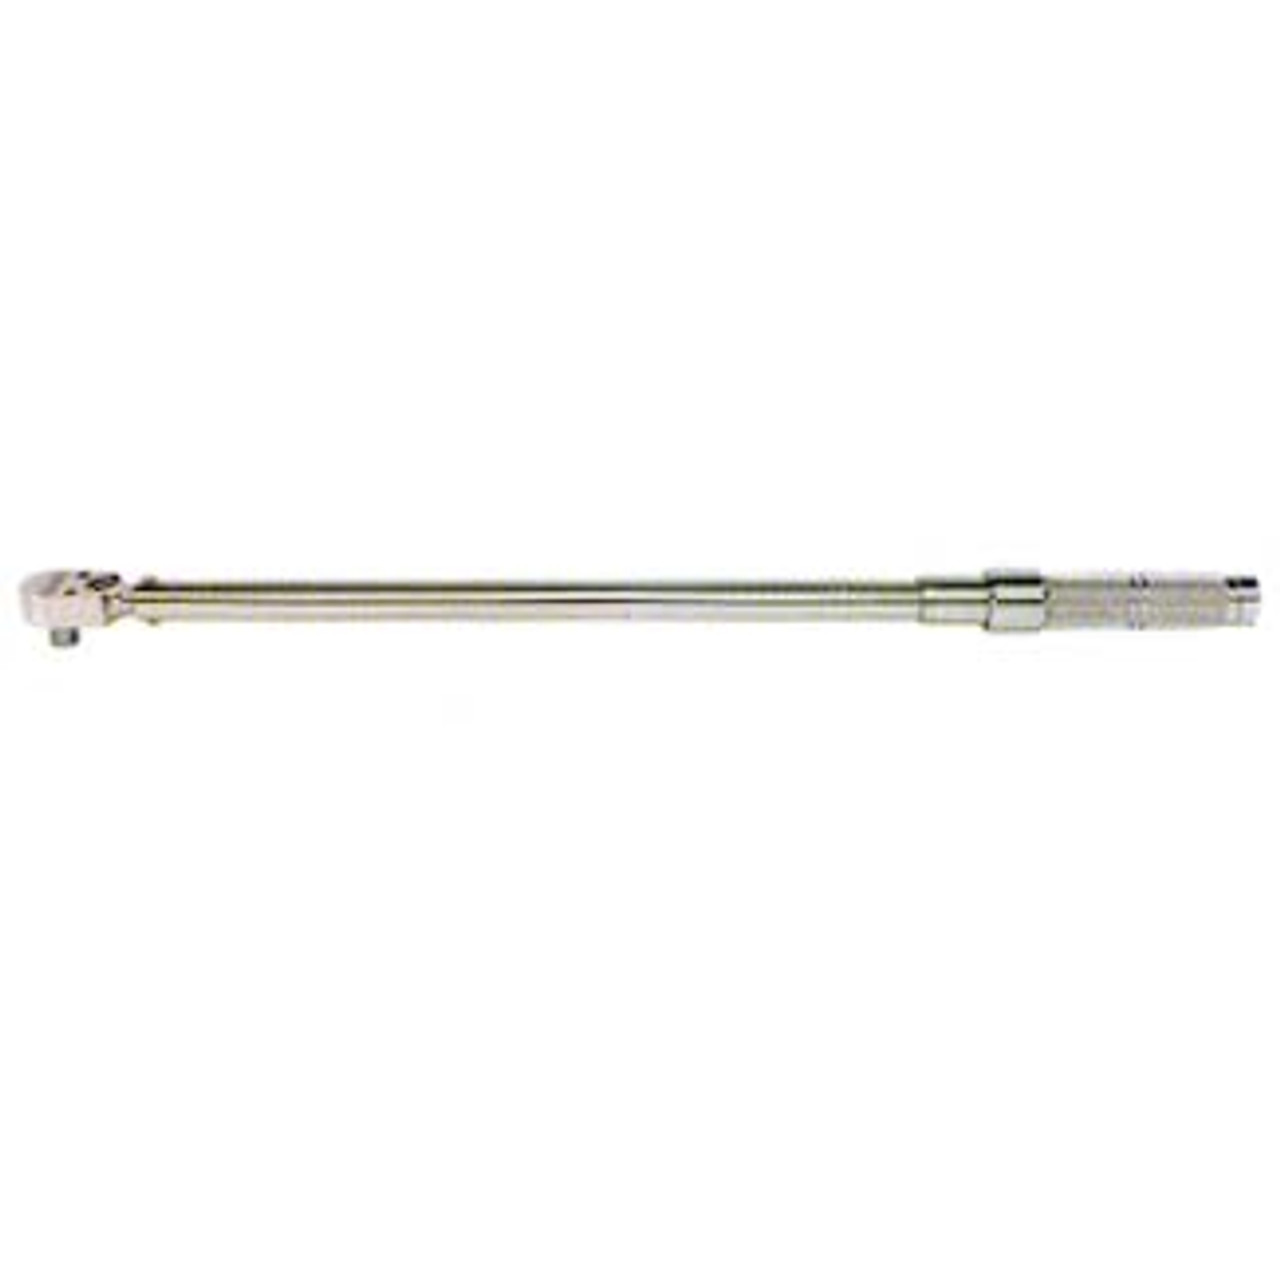 BIG DAWG and #153, Foot Pound Torque Wrench - Ratchet Head 6020AB